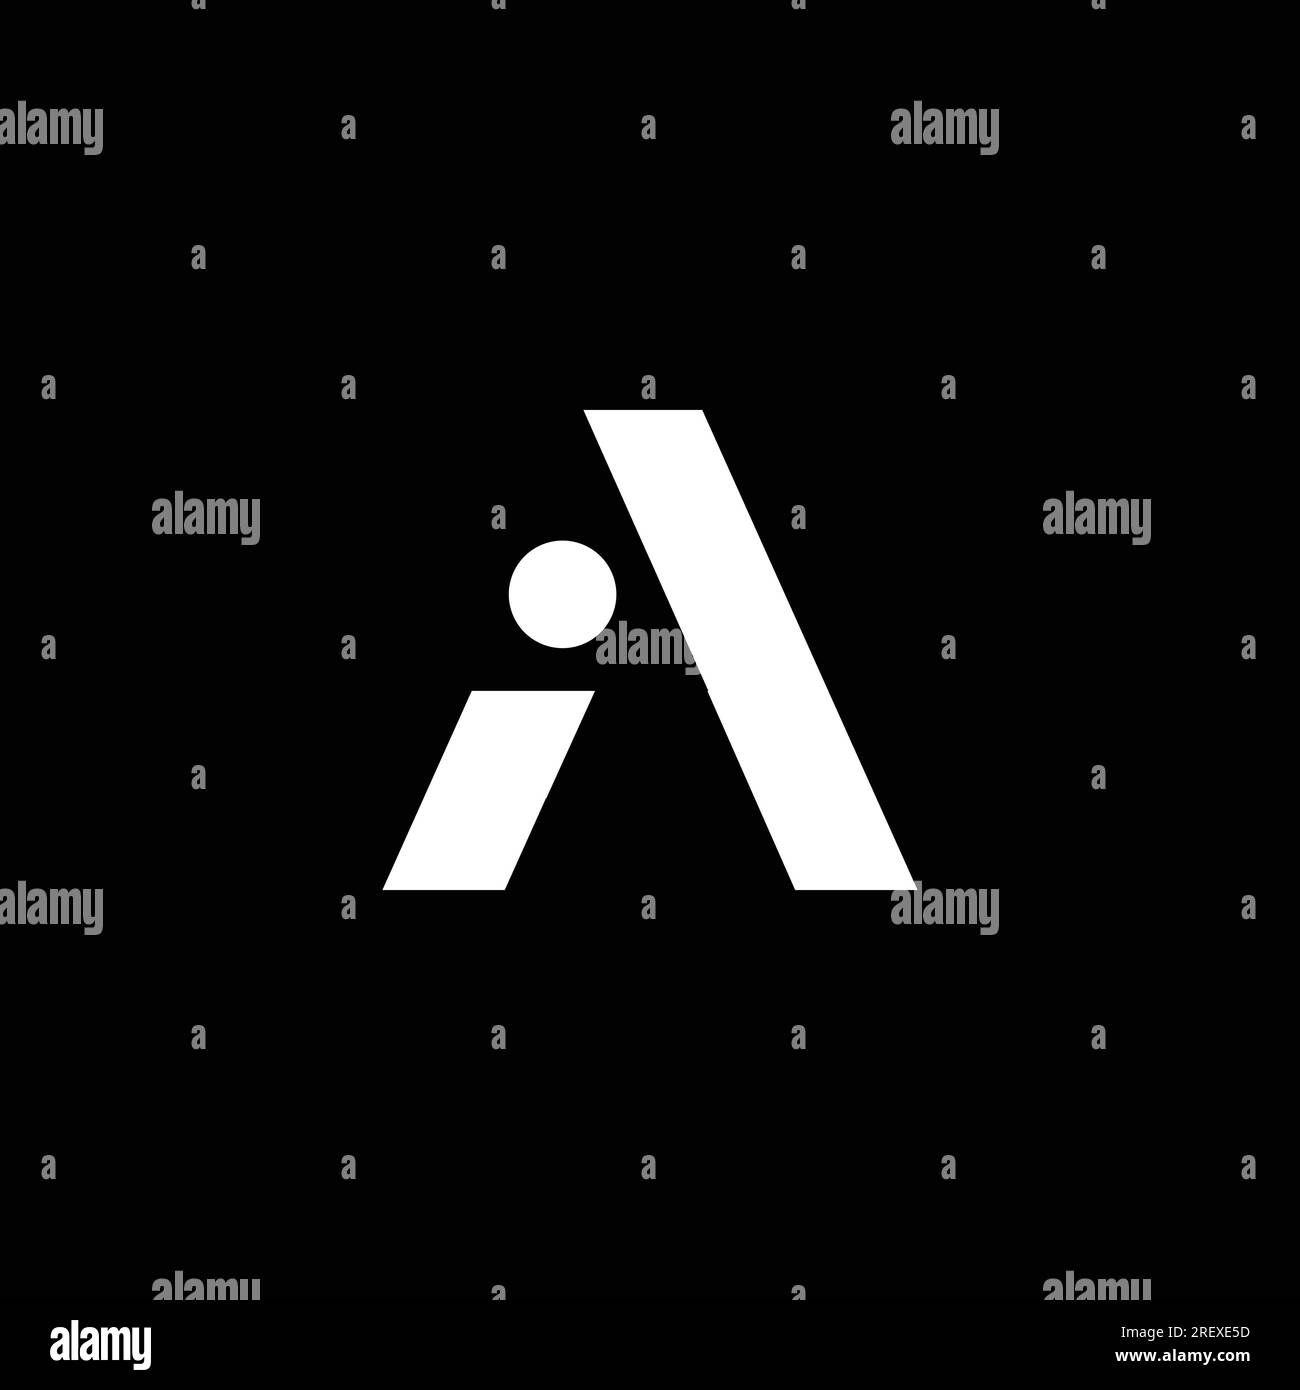 eps10 vector initial letter a logo design template isolated on black background Stock Vector